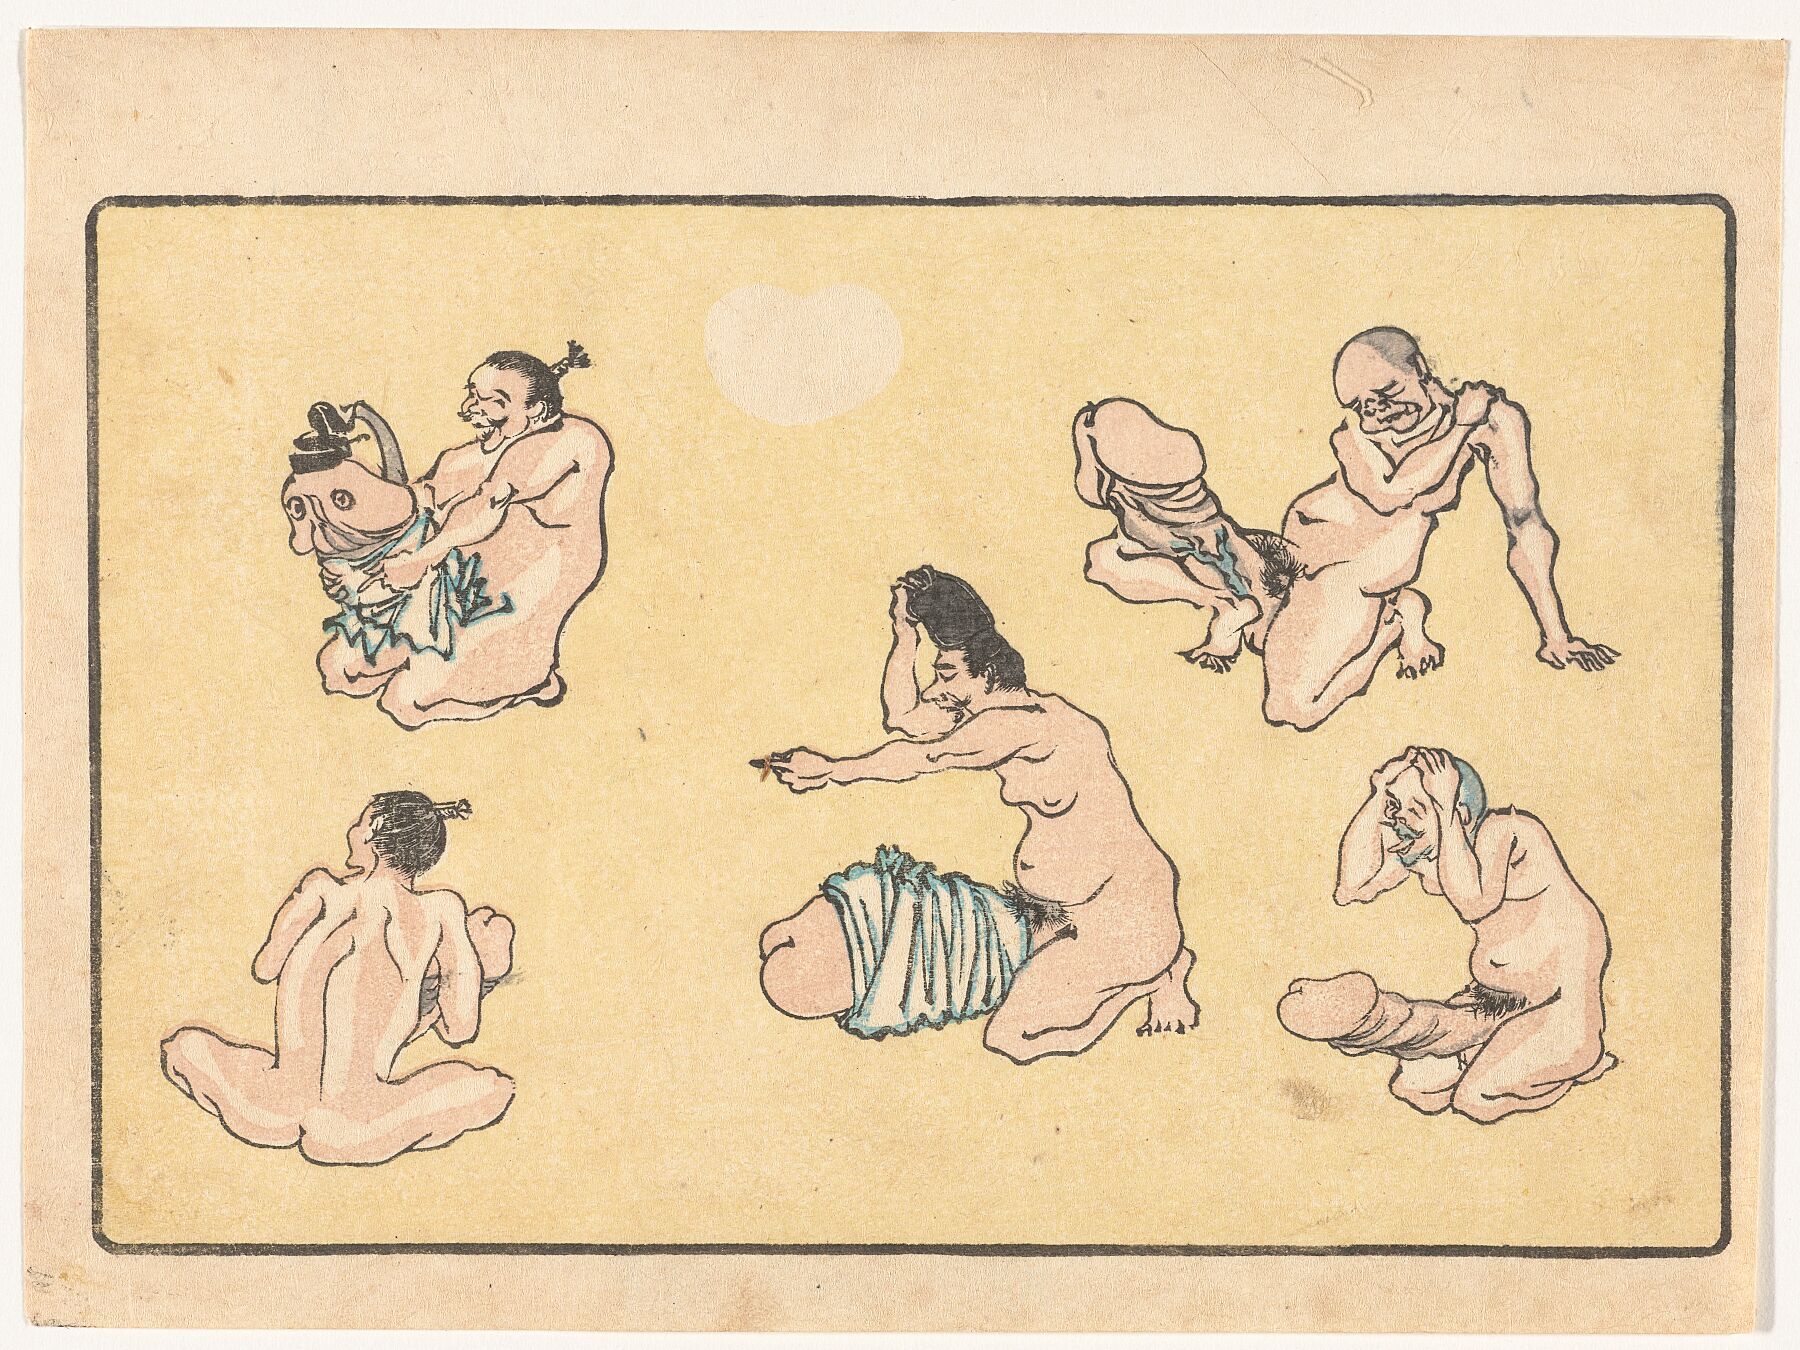 Connected Penis by Kawanabe Kyôsai - c. 1870